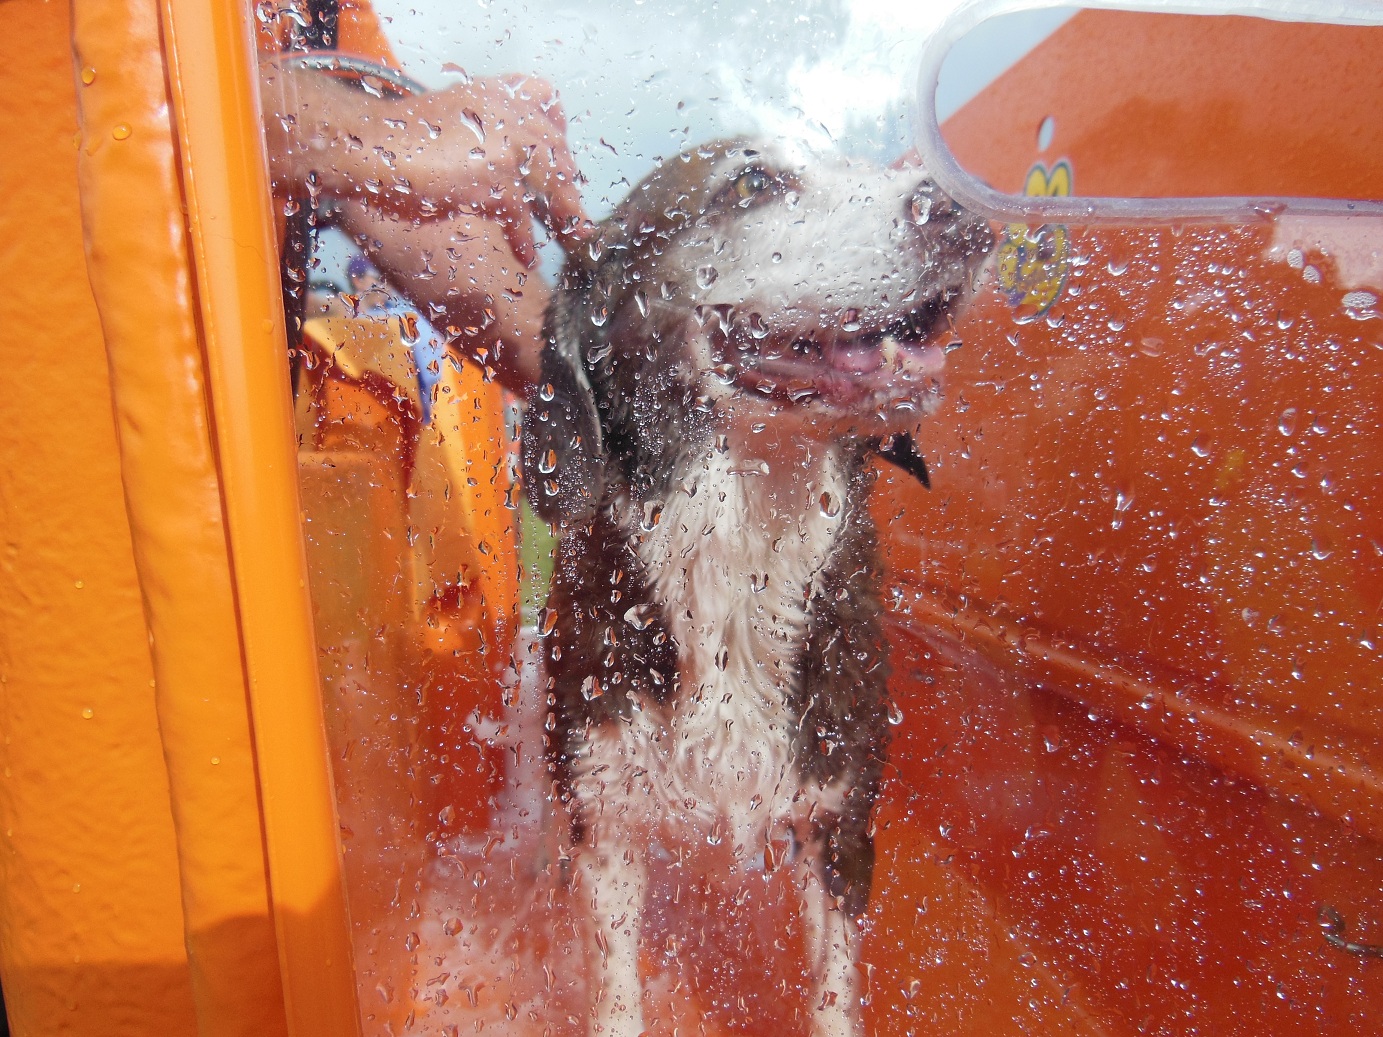 South of river high ROI Mobile Dog wash inc...Business For Sale